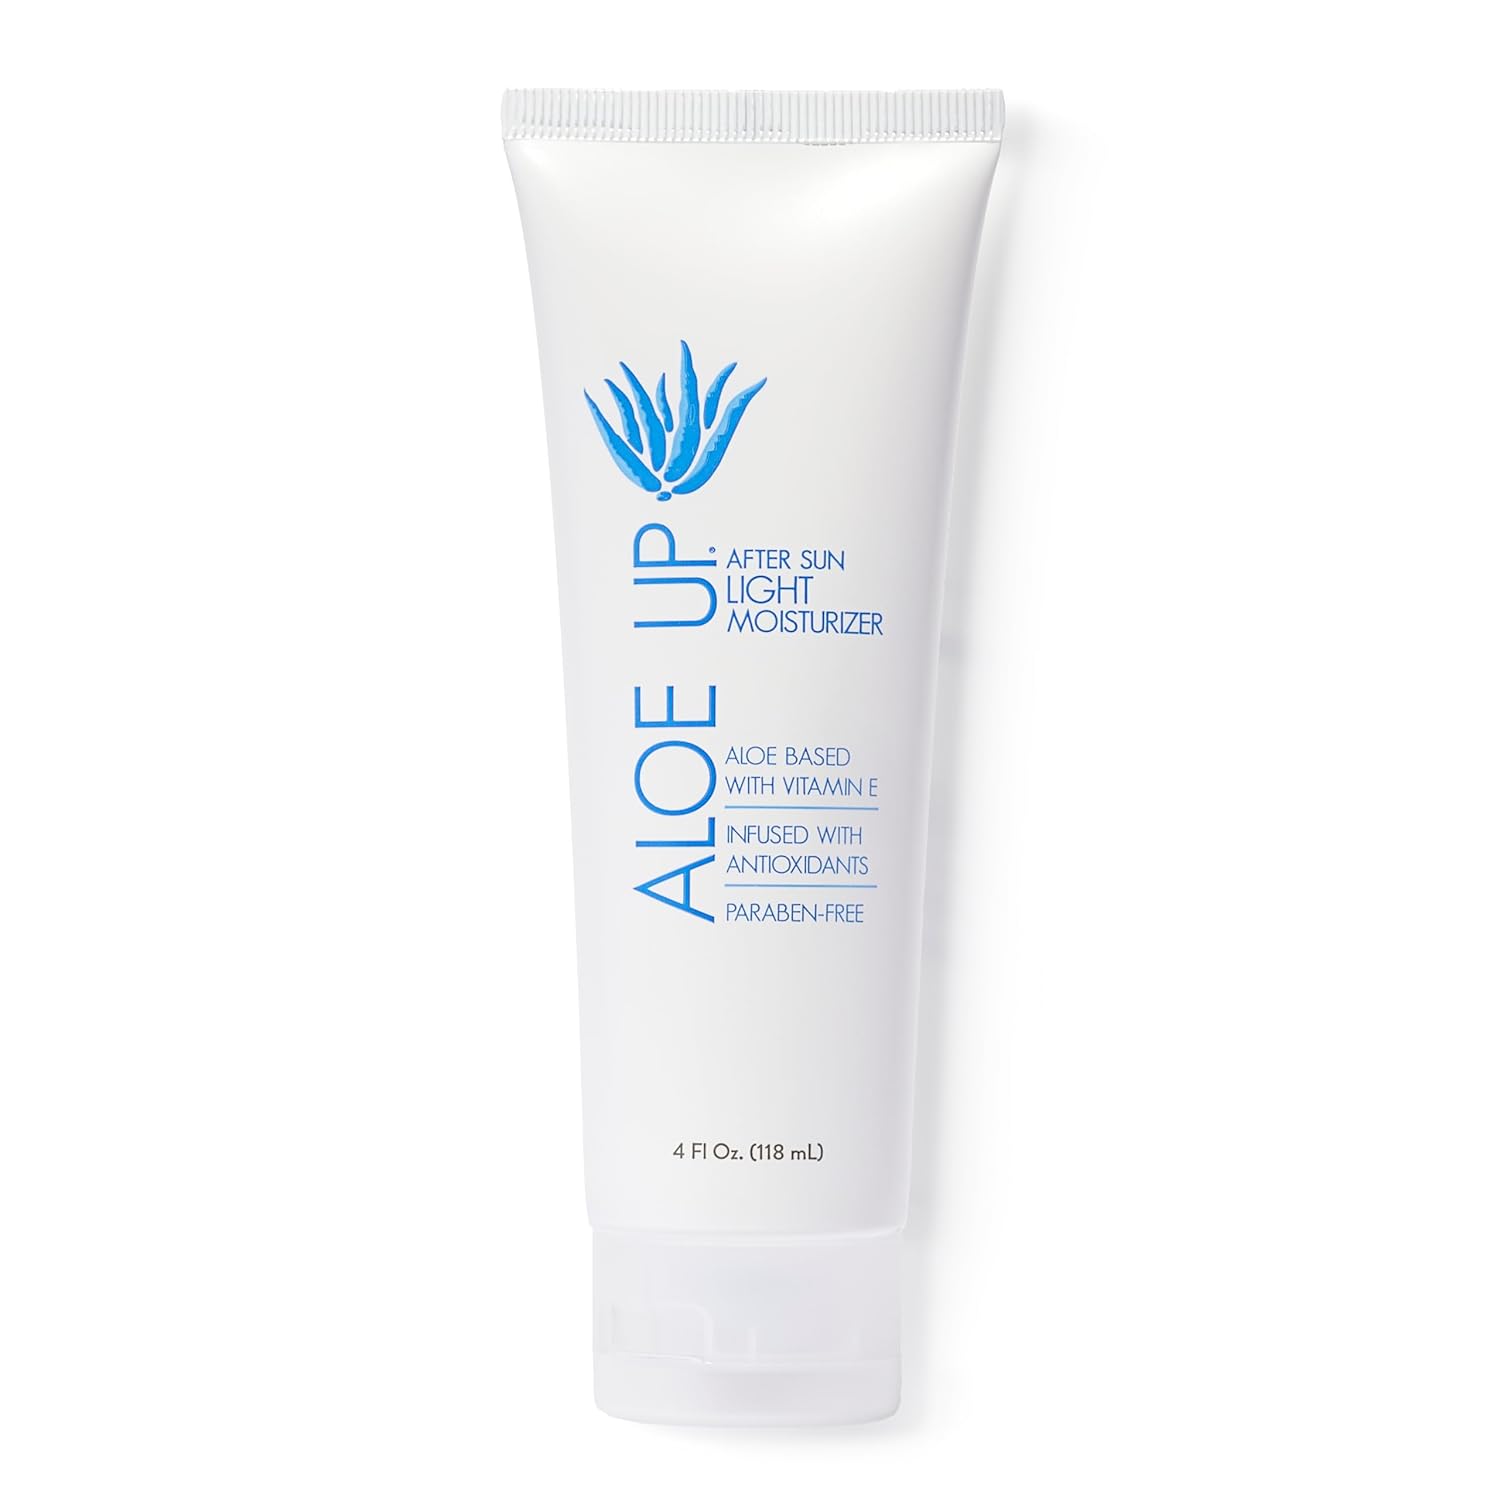 ALOE UP Spa Collection After Sun Light Moisturizer - Organic Hydrating After Sun Lotion With Aloe Vera Gel and Vitamin E - Reef Friendly - Mineral Oil Free - Peach-Apricot Fragrance - 4 Oz